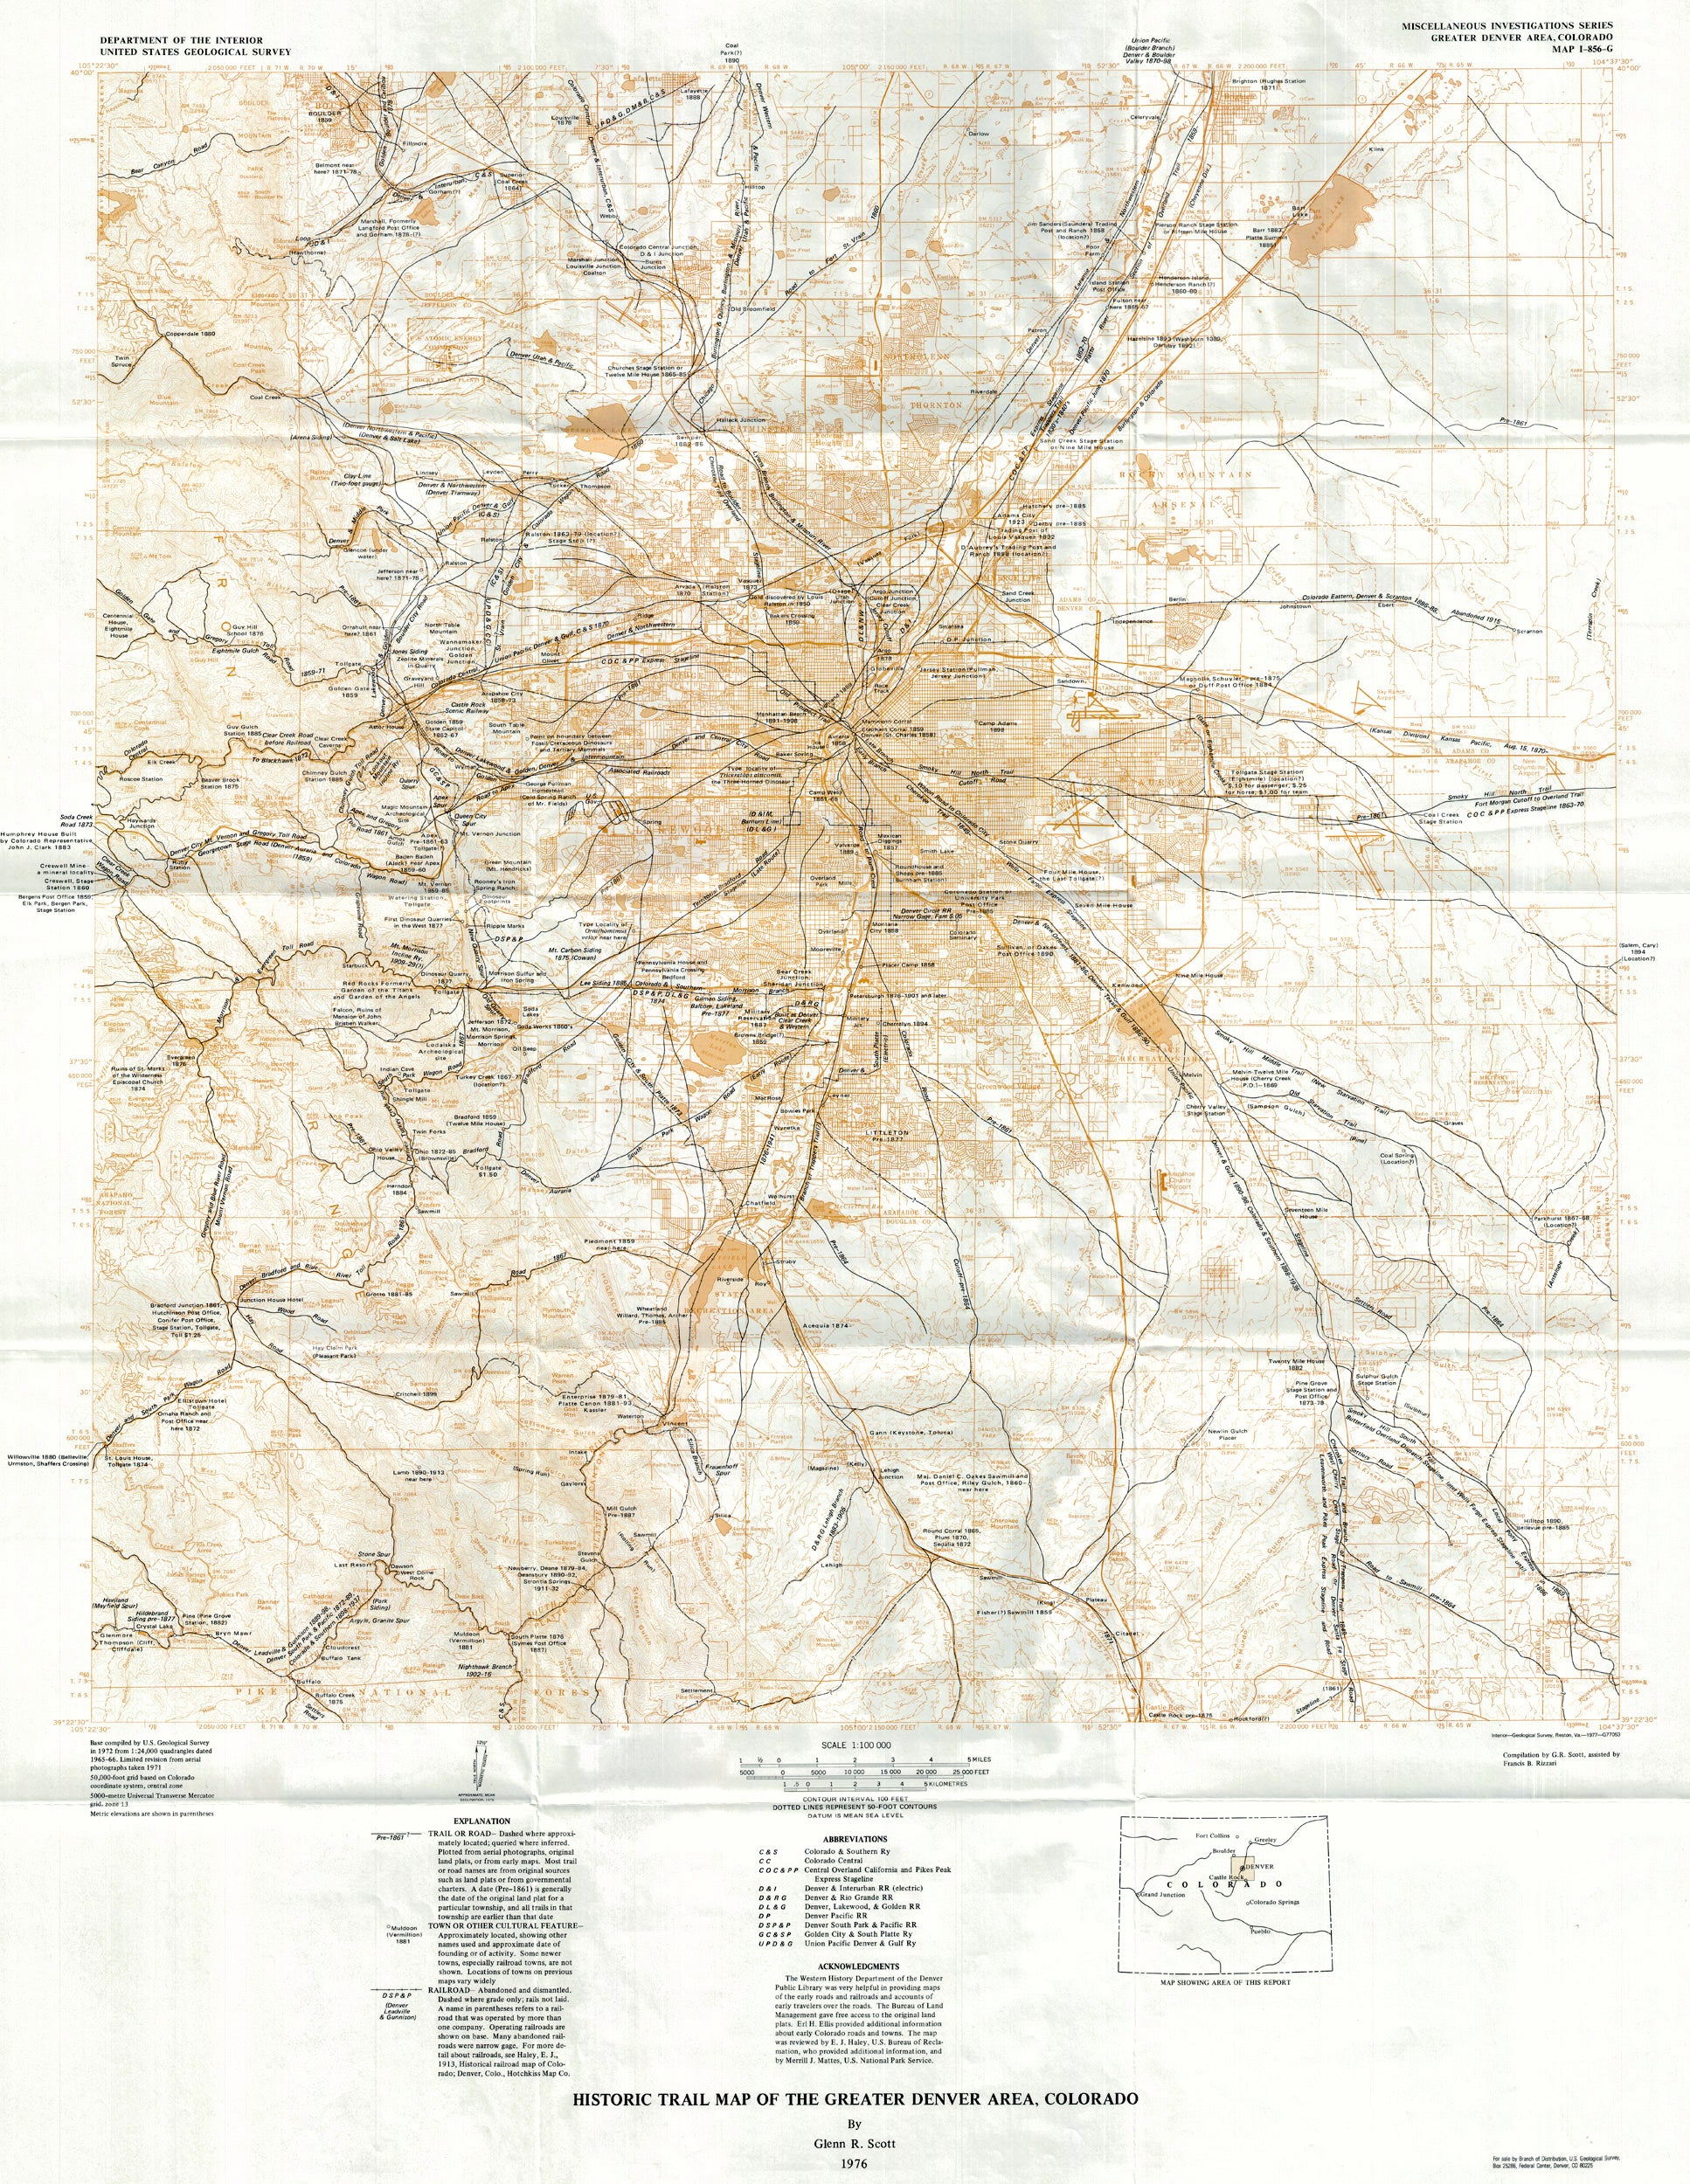 (CO. - Denver Area) Historic Trail Map Of The Greater Denver Area